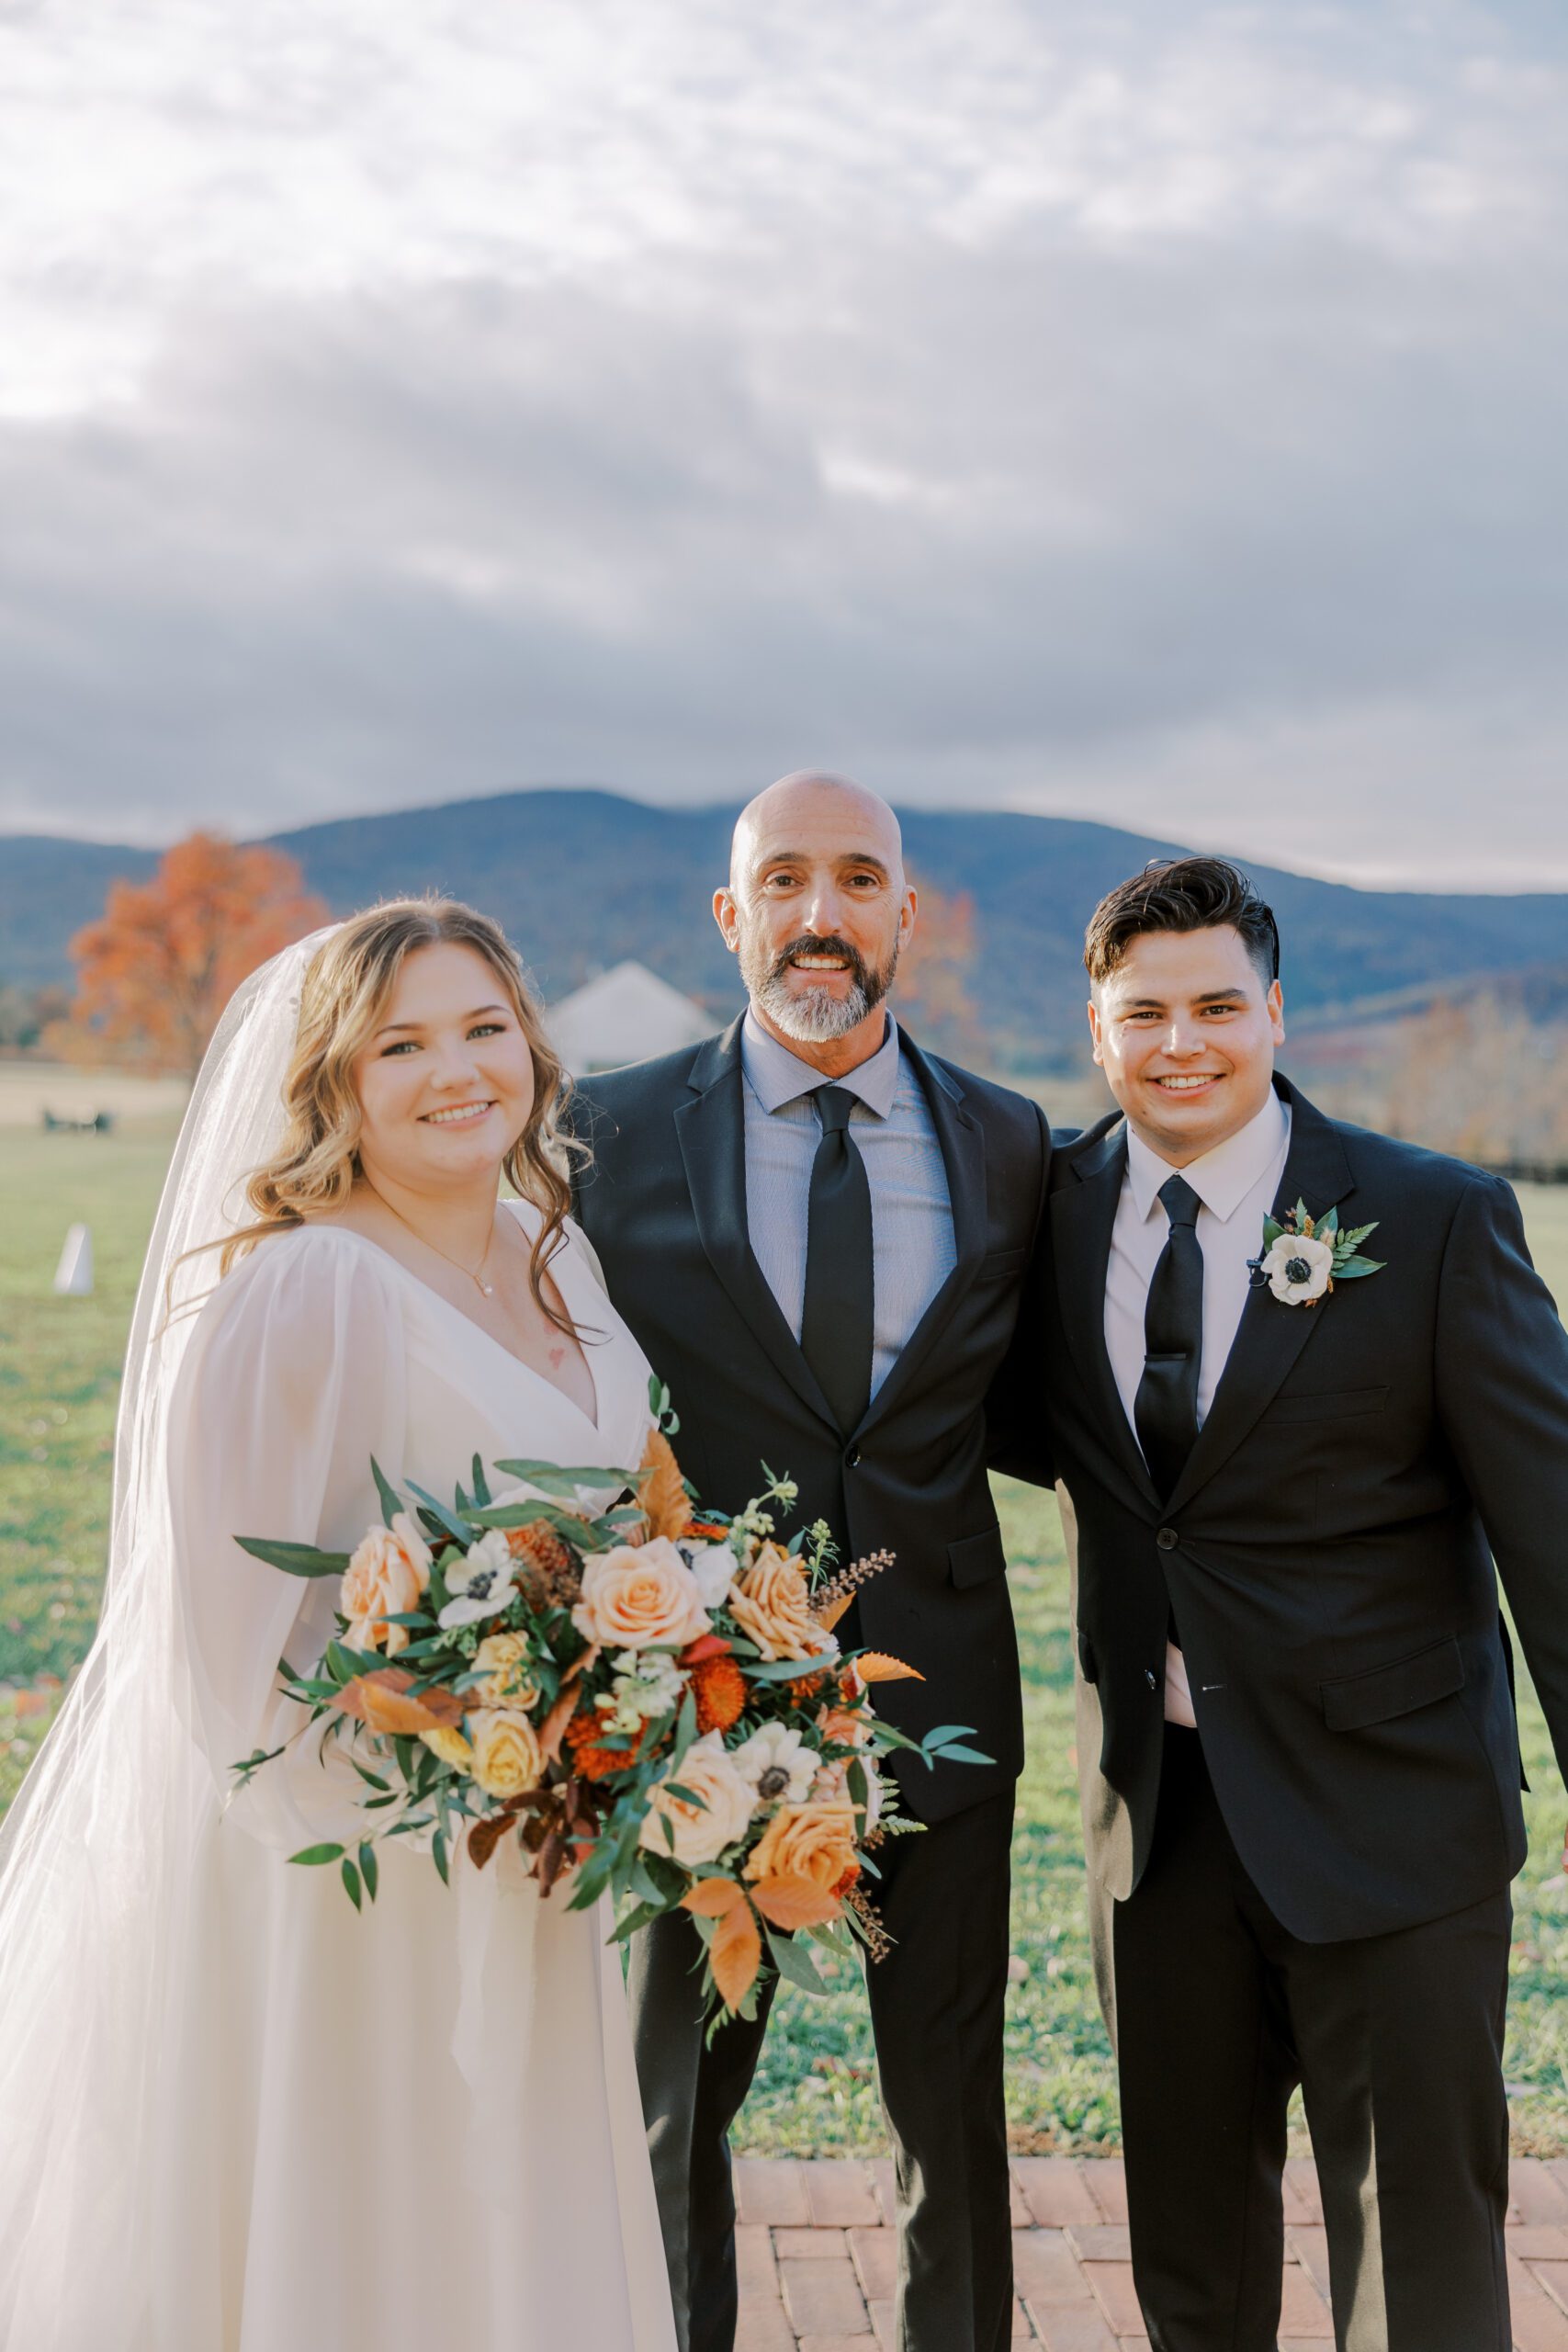 Photo of bride and groom with their officiant, mountain scenery in background